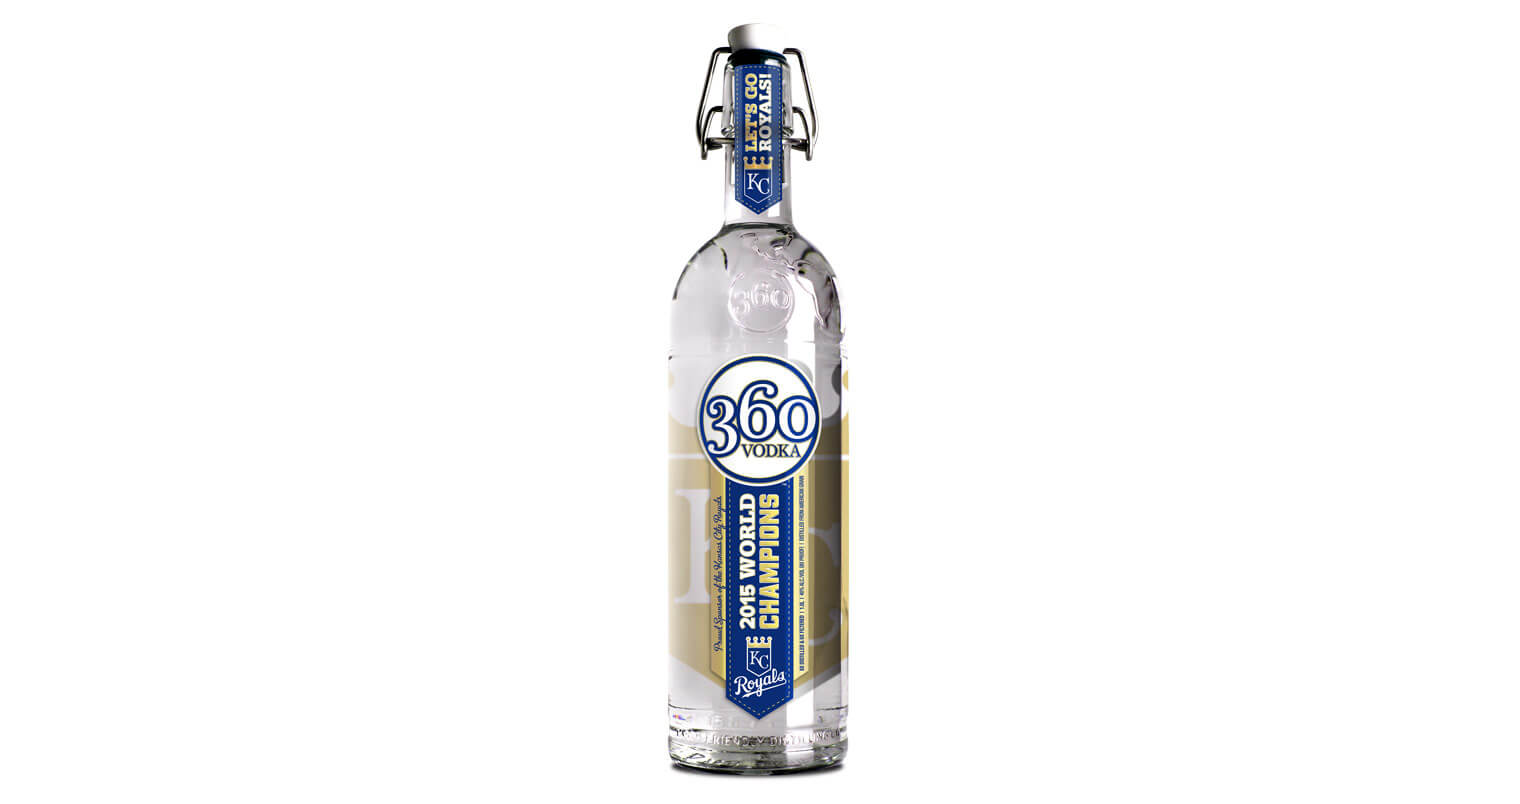 360 Vodka Produces Bottle to Celebrate Royals World Series Championship, featured brand, featured image